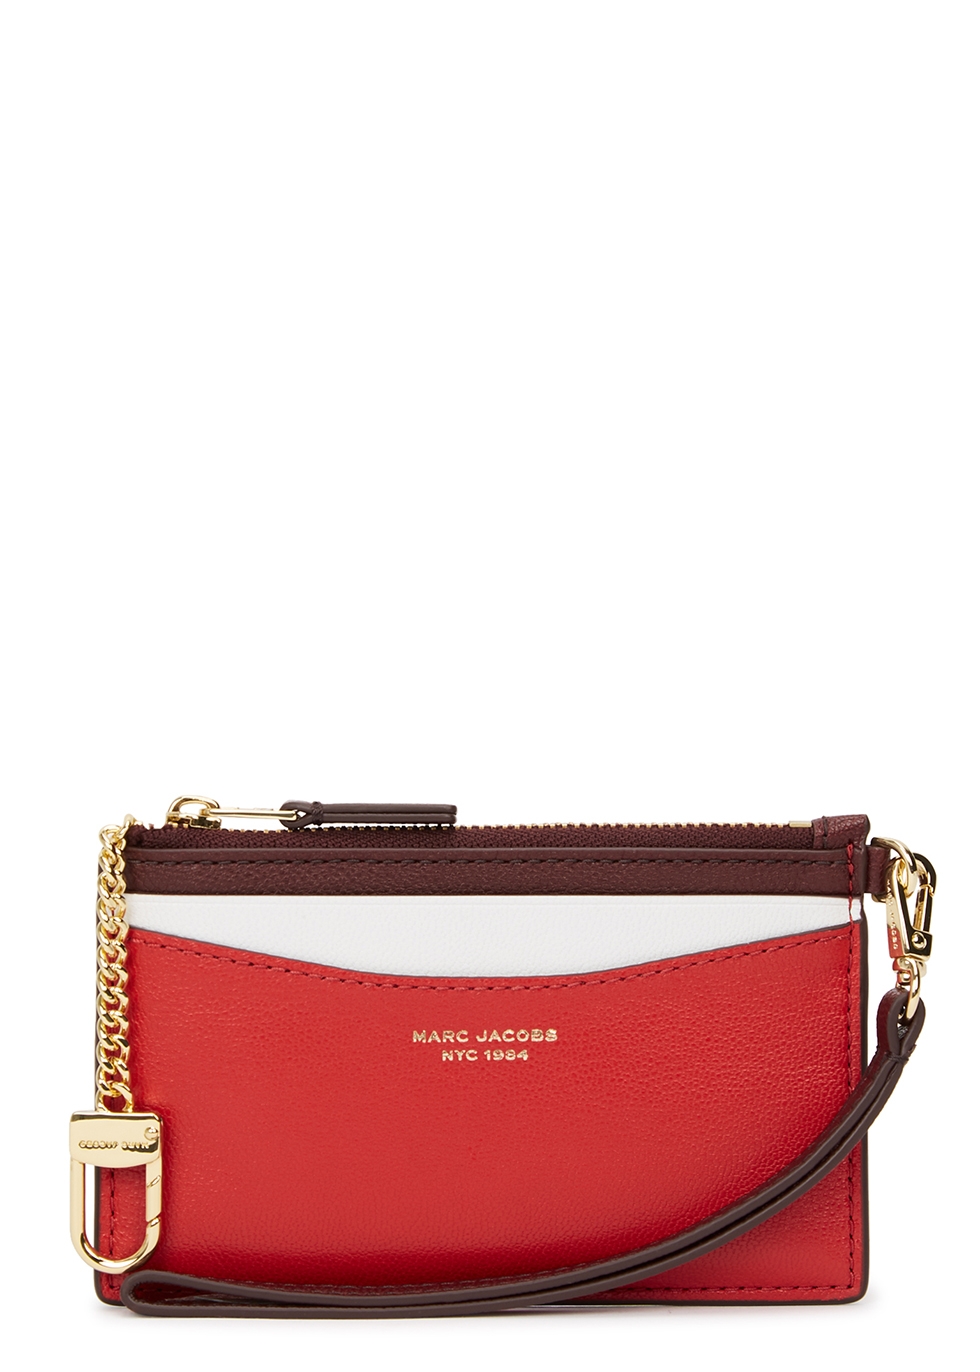 Marc Jacobs The Slim 84 leather wallet